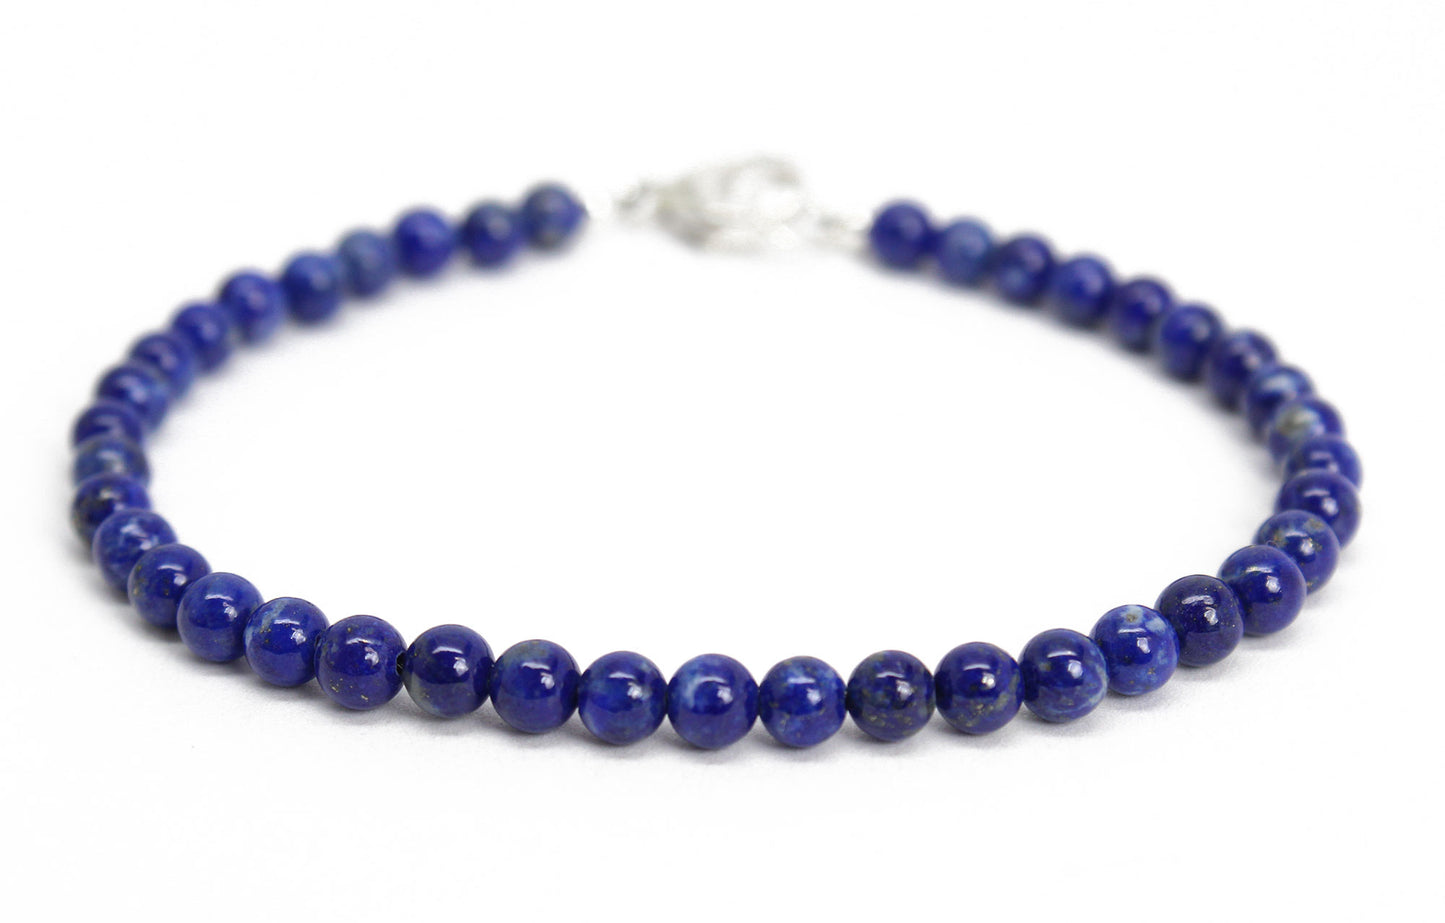 Beautiful Lapis Lazuli Bracelet, 4mm with Sterling Silver or Gold Filled Clasp